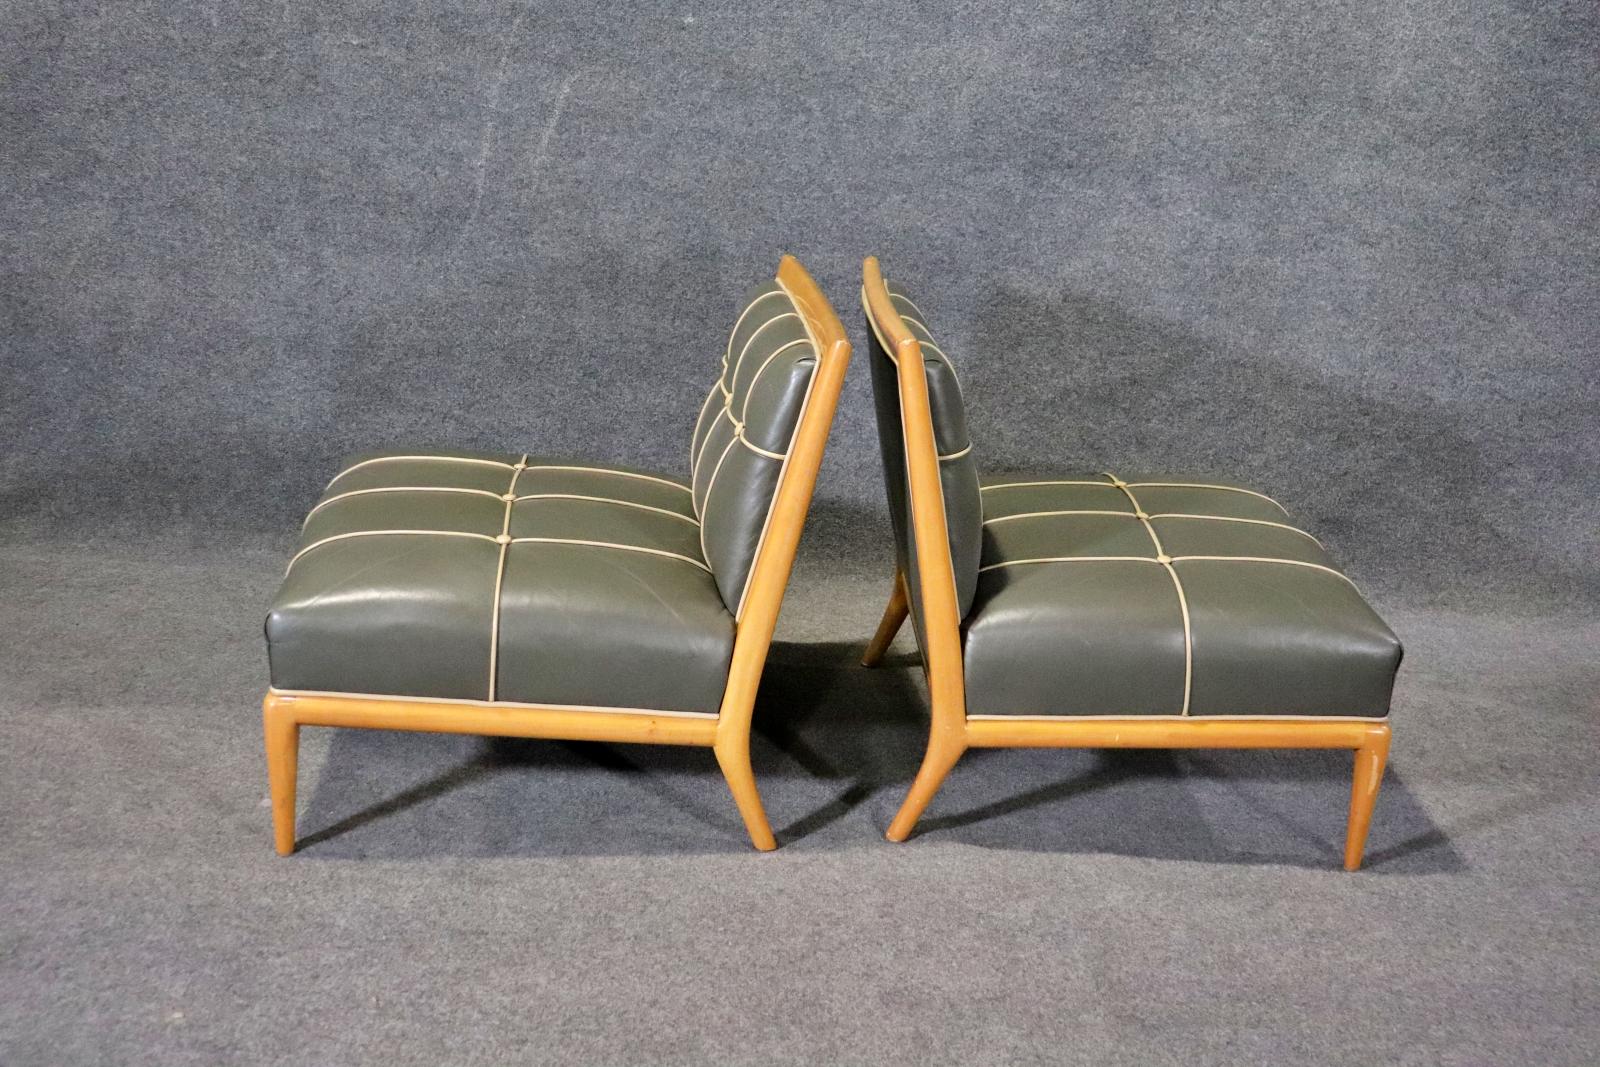 Mid-century modern style slipper chairs by Nancy Corzine. Tufted leather in blonde wood frame.
Please confirm location NY or NJ